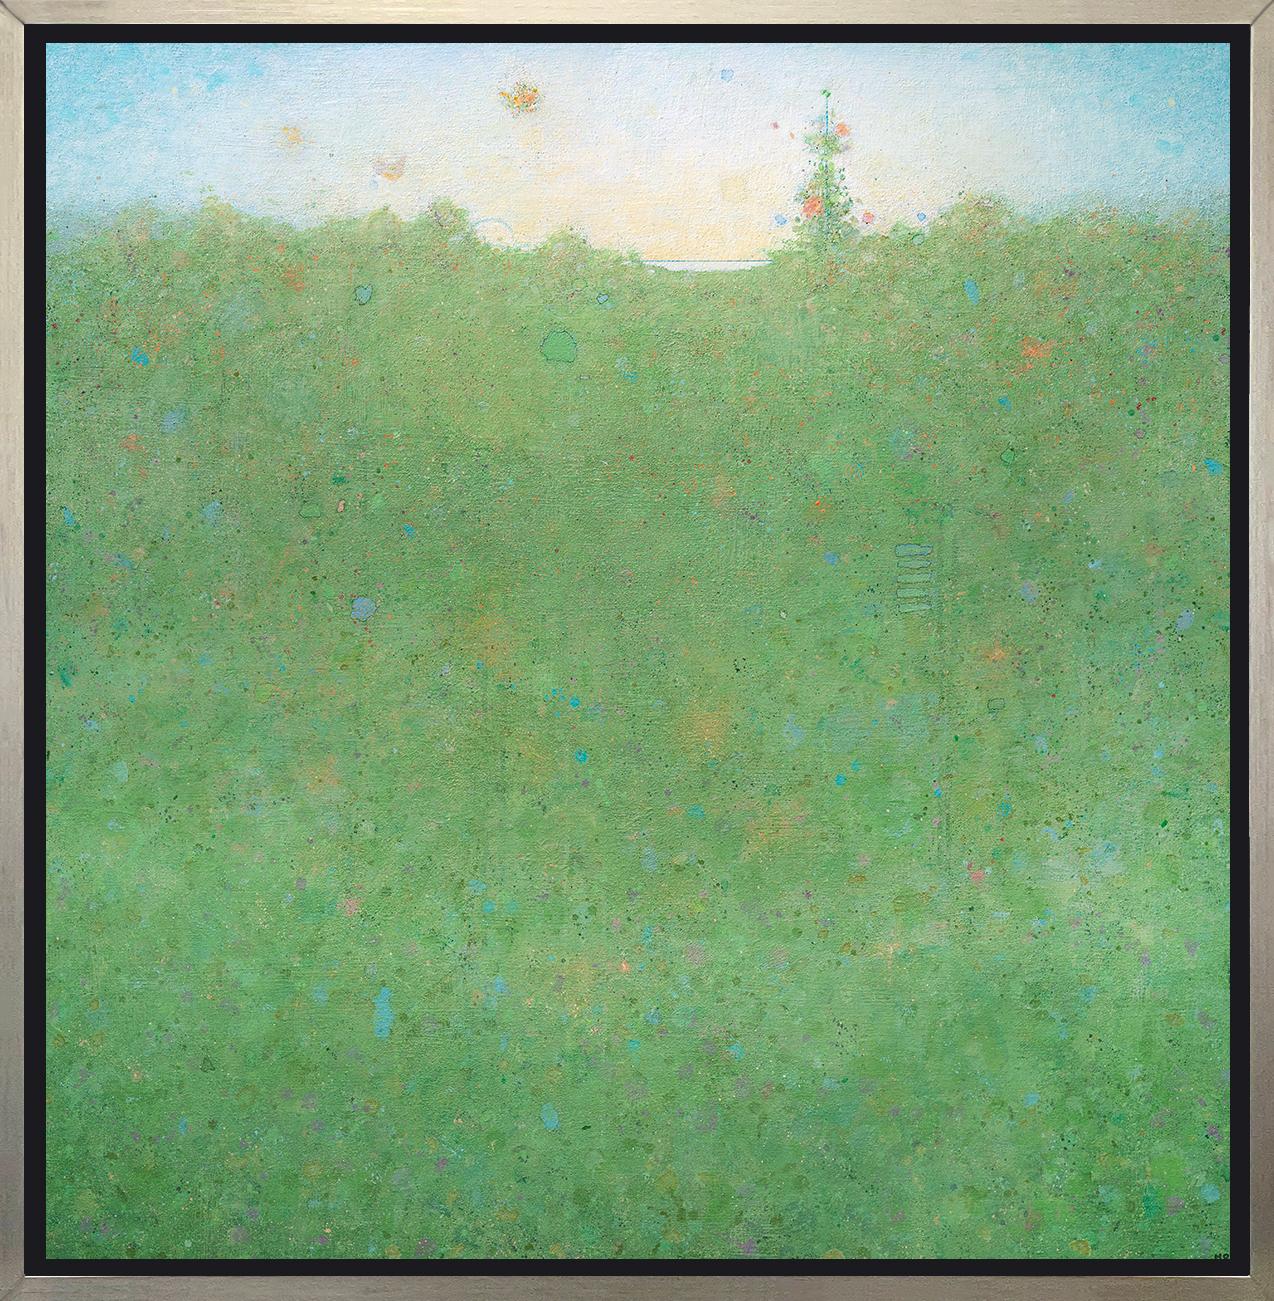 Elwood Howell Abstract Print - "Springtime, " Framed Limited Edition Giclee Print, 24" x 24"